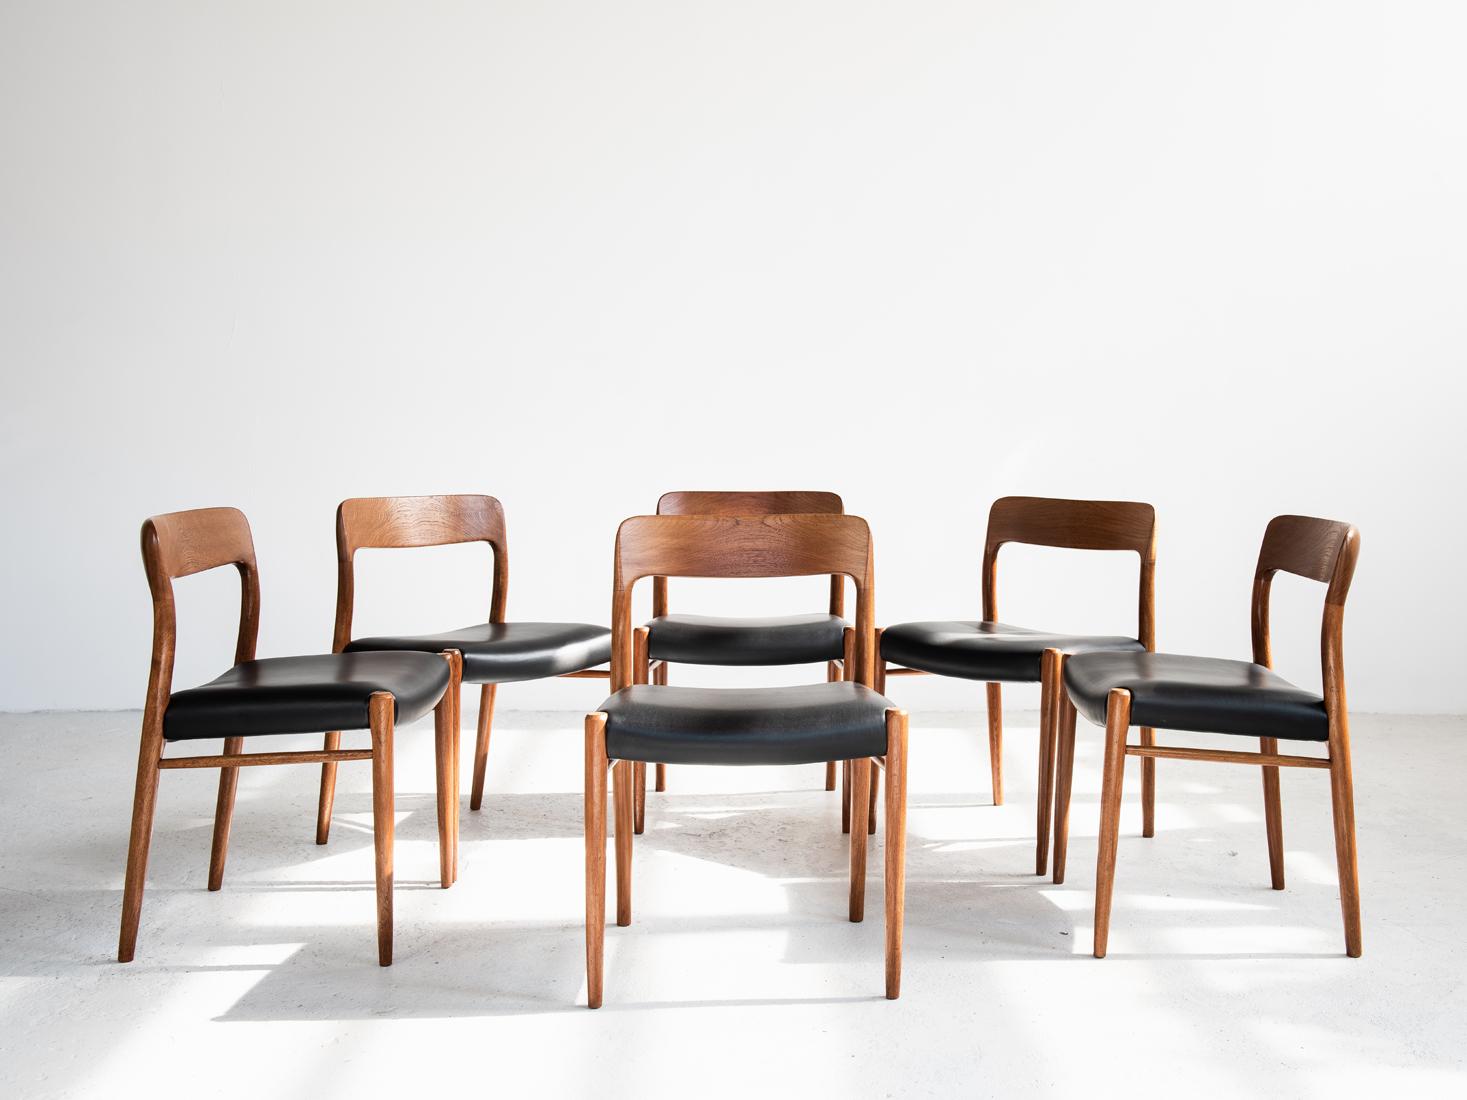 Midcentury set of 6 chairs model 75 designed by Niels O. Møller and manufactured by J.L. Møller in Denmark in the 1960s. It is top quality! The chairs are labelled by the manufacturer. They are made of solid teak and the original black leather. The